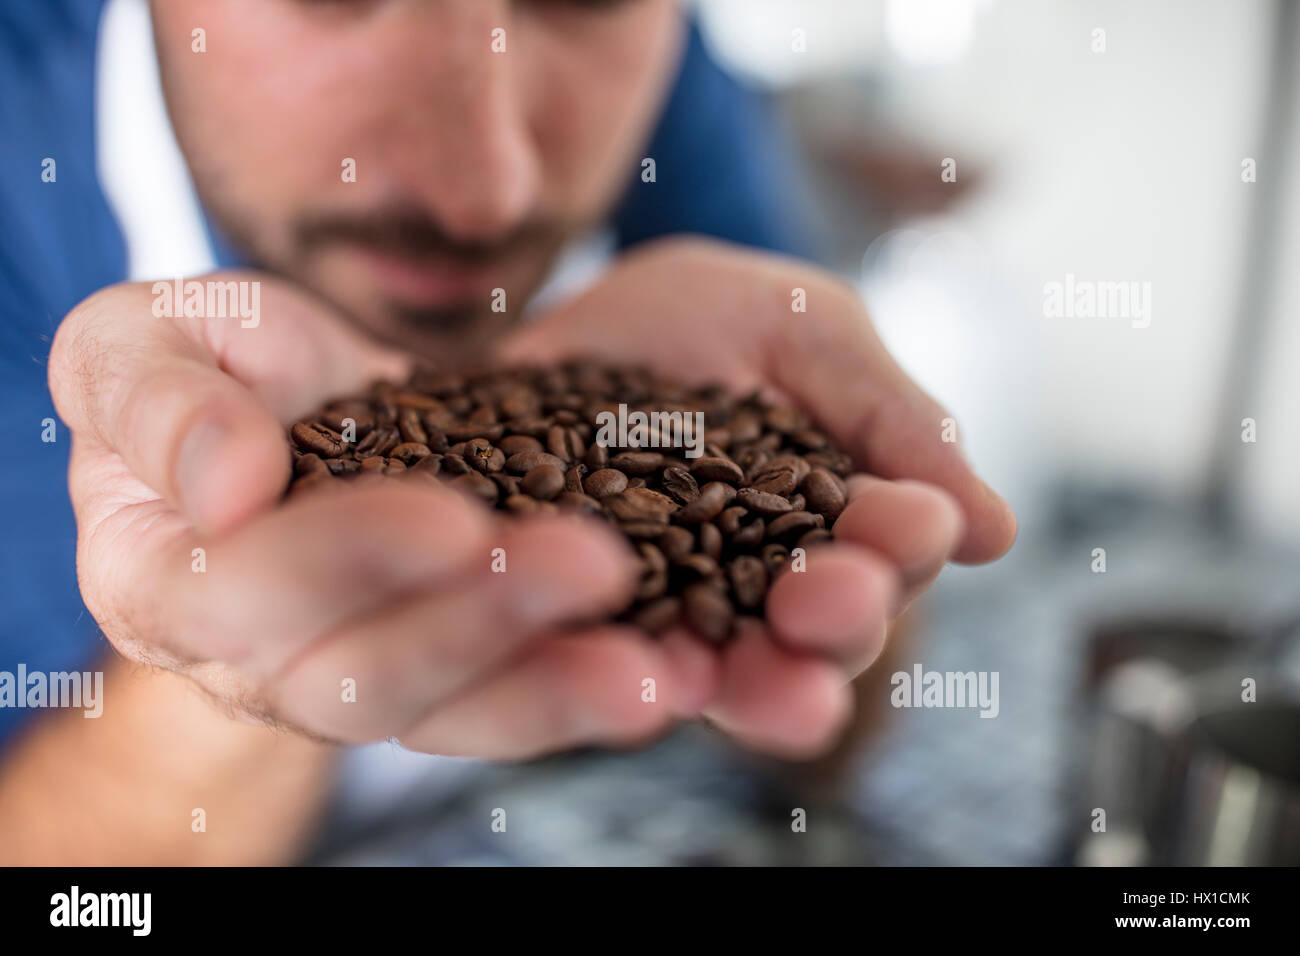 Man smelling handful of coffee beans Stock Photo